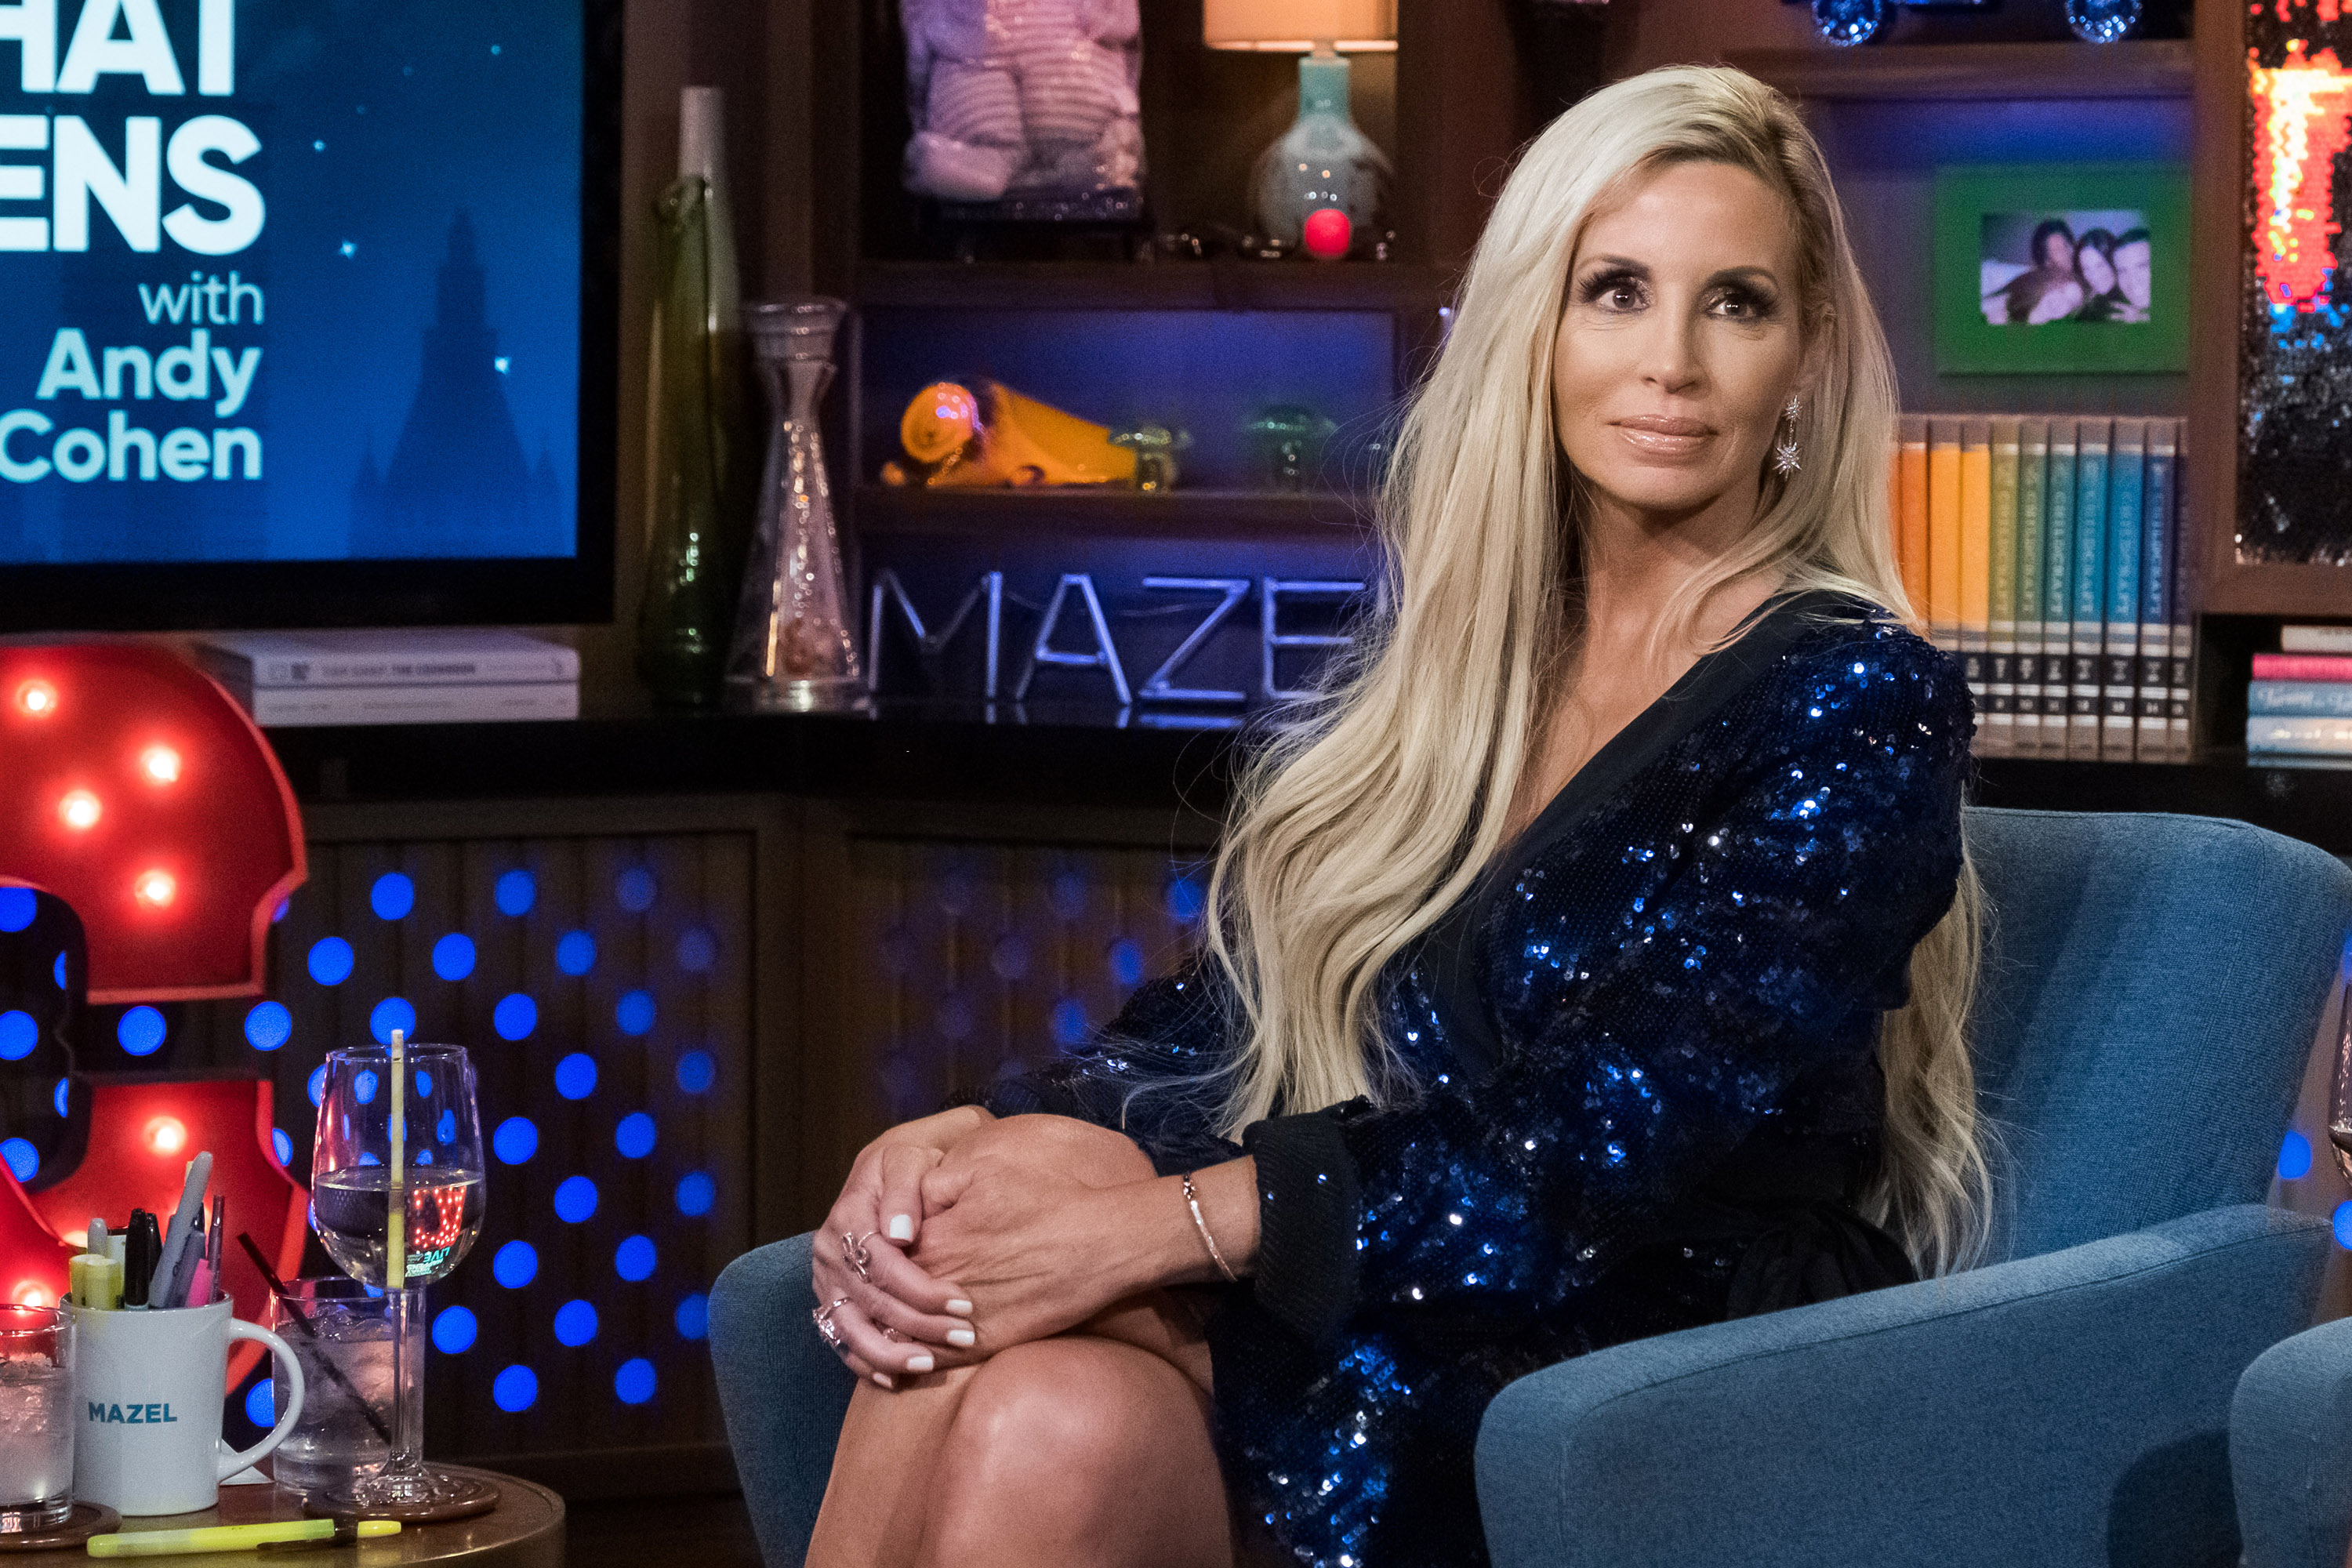 Camille Grammer slams 'boring and overplayed' Dorit Kemsley